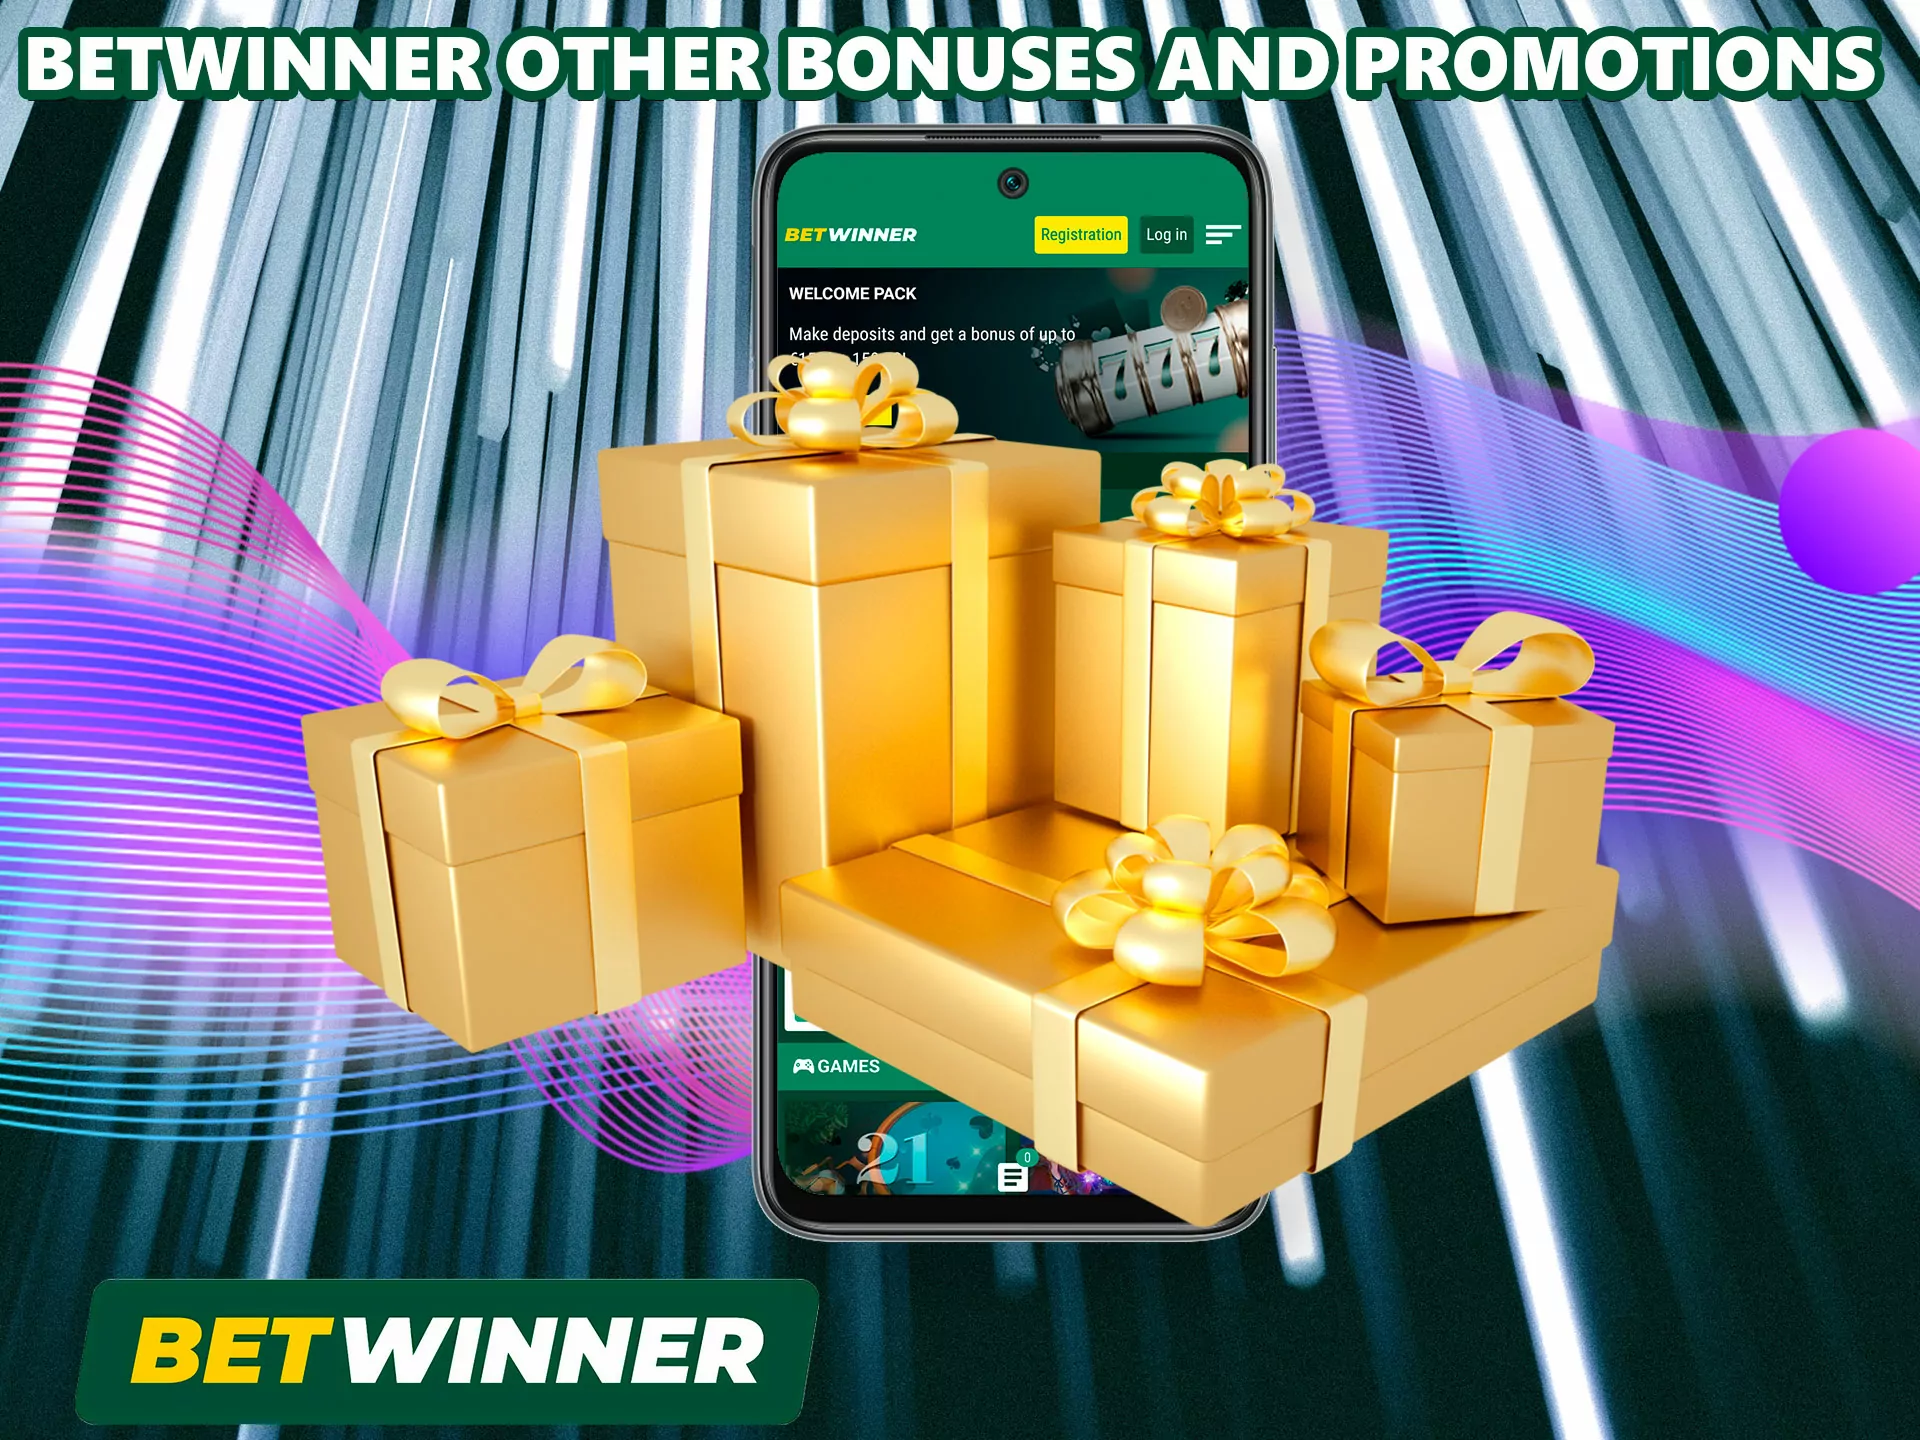 Betwinner is more than you think, the bookmaker offers its customers a huge amount of bonuses and promotions.